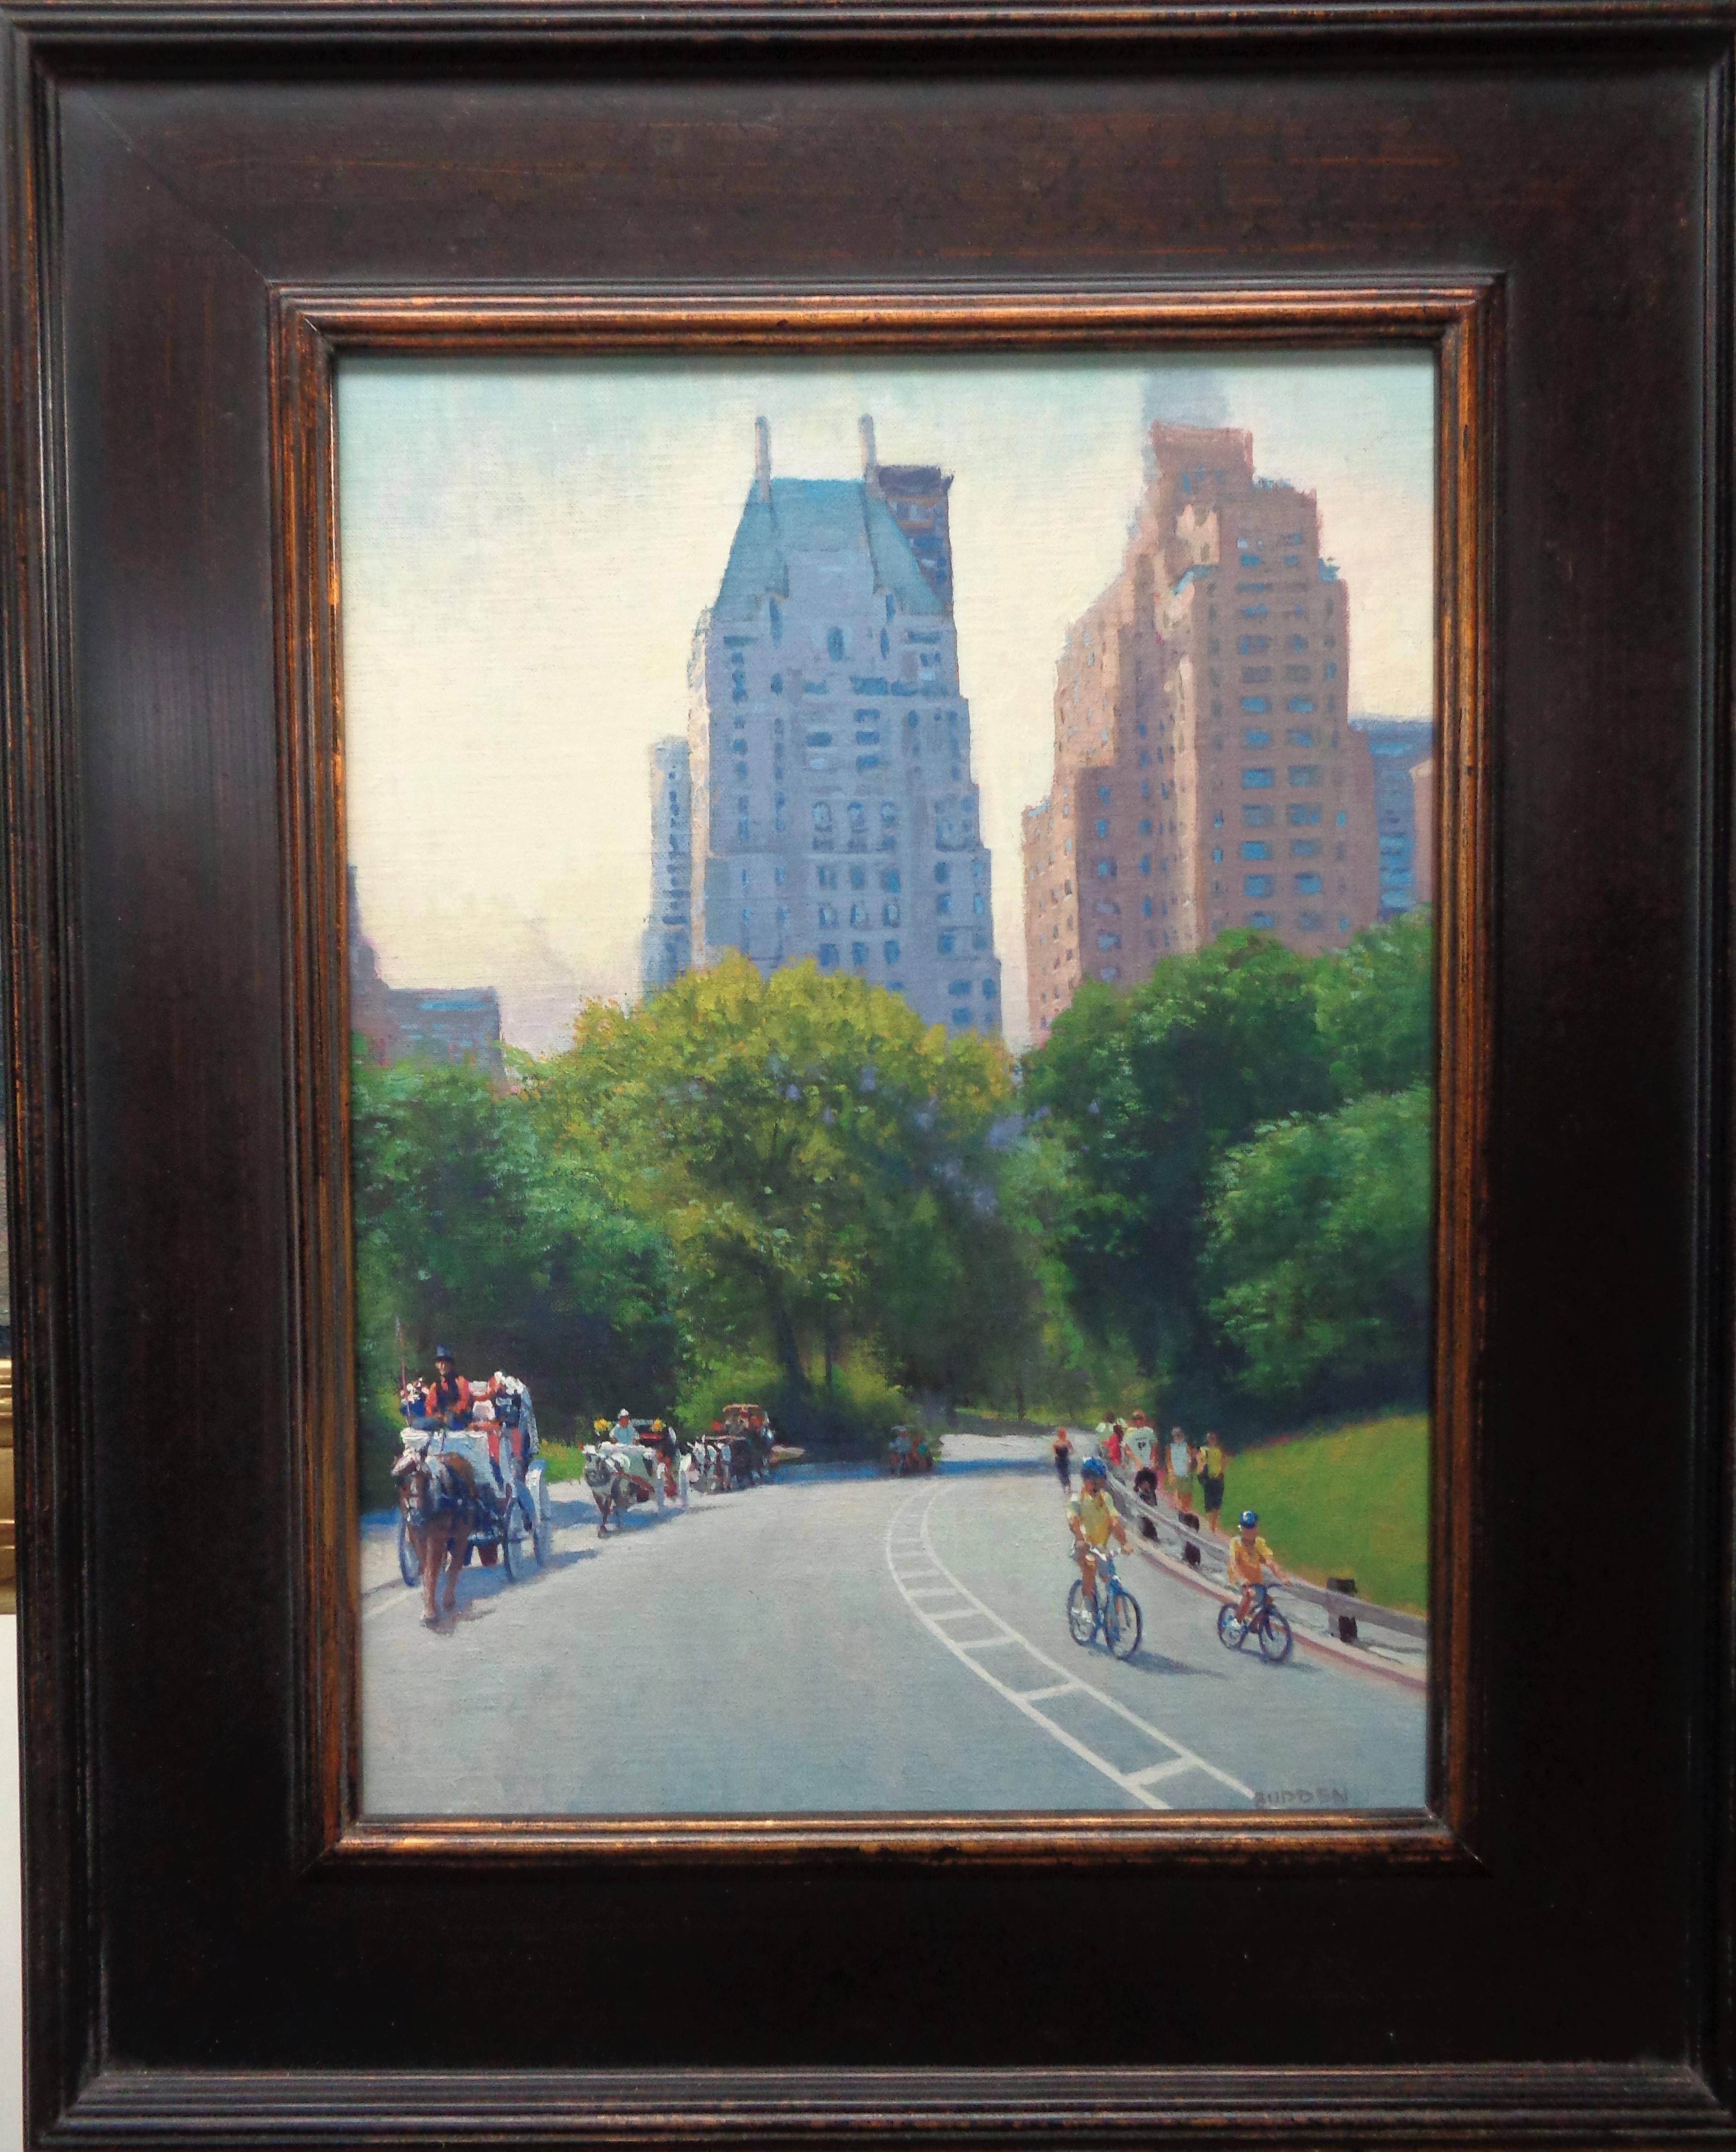 Summertime, Central Park
oil/panel
16 x 12 unframed, 22.38 x 18.5 framed
Summertime, Central Park is an oil painting on canvas panel by award winning contemporary artist Michael Budden. Summer is not the usual time NYC is depicted and that is one